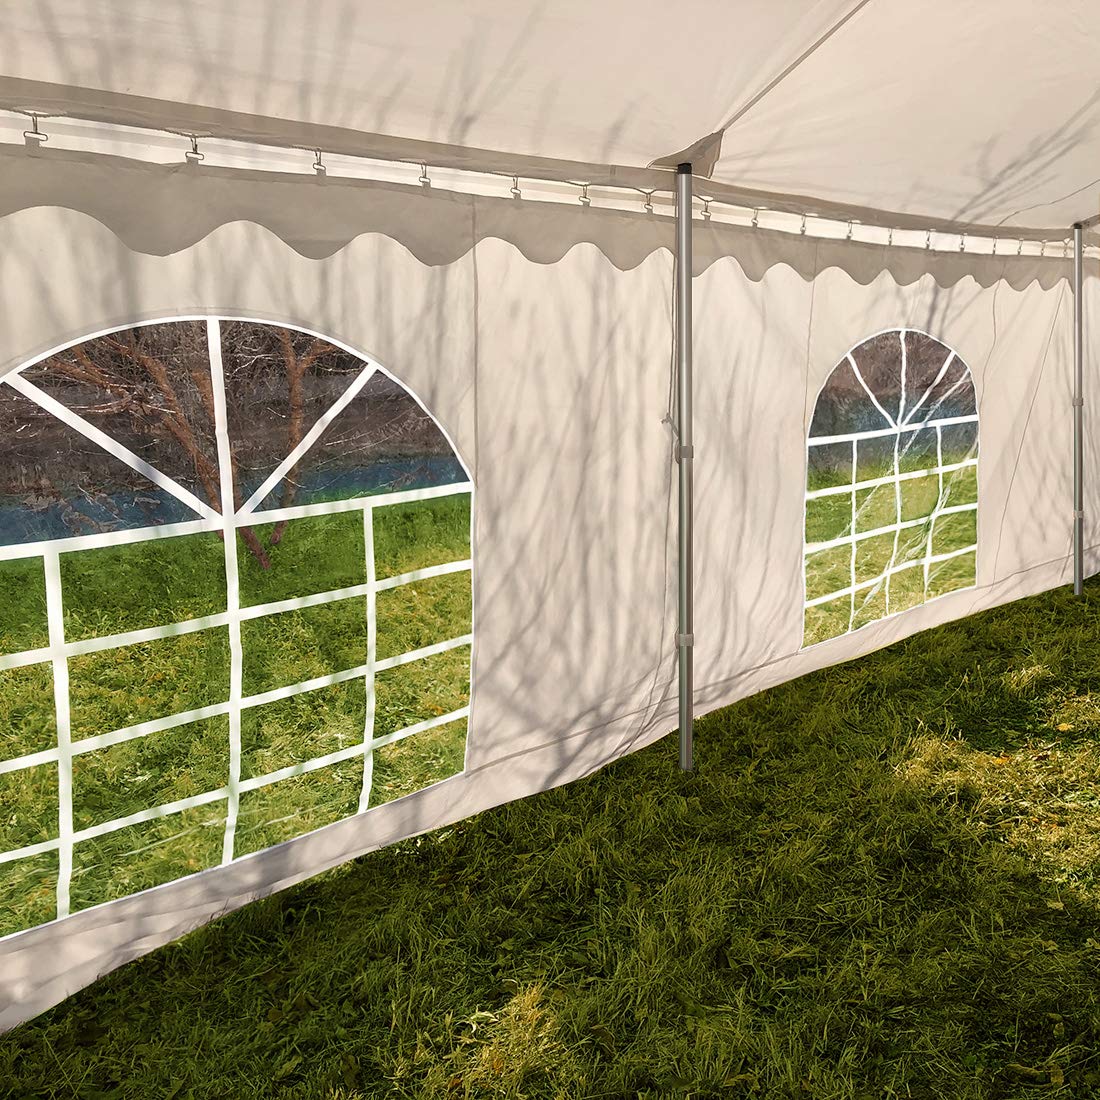 20' x 40' Party Tent sidewall